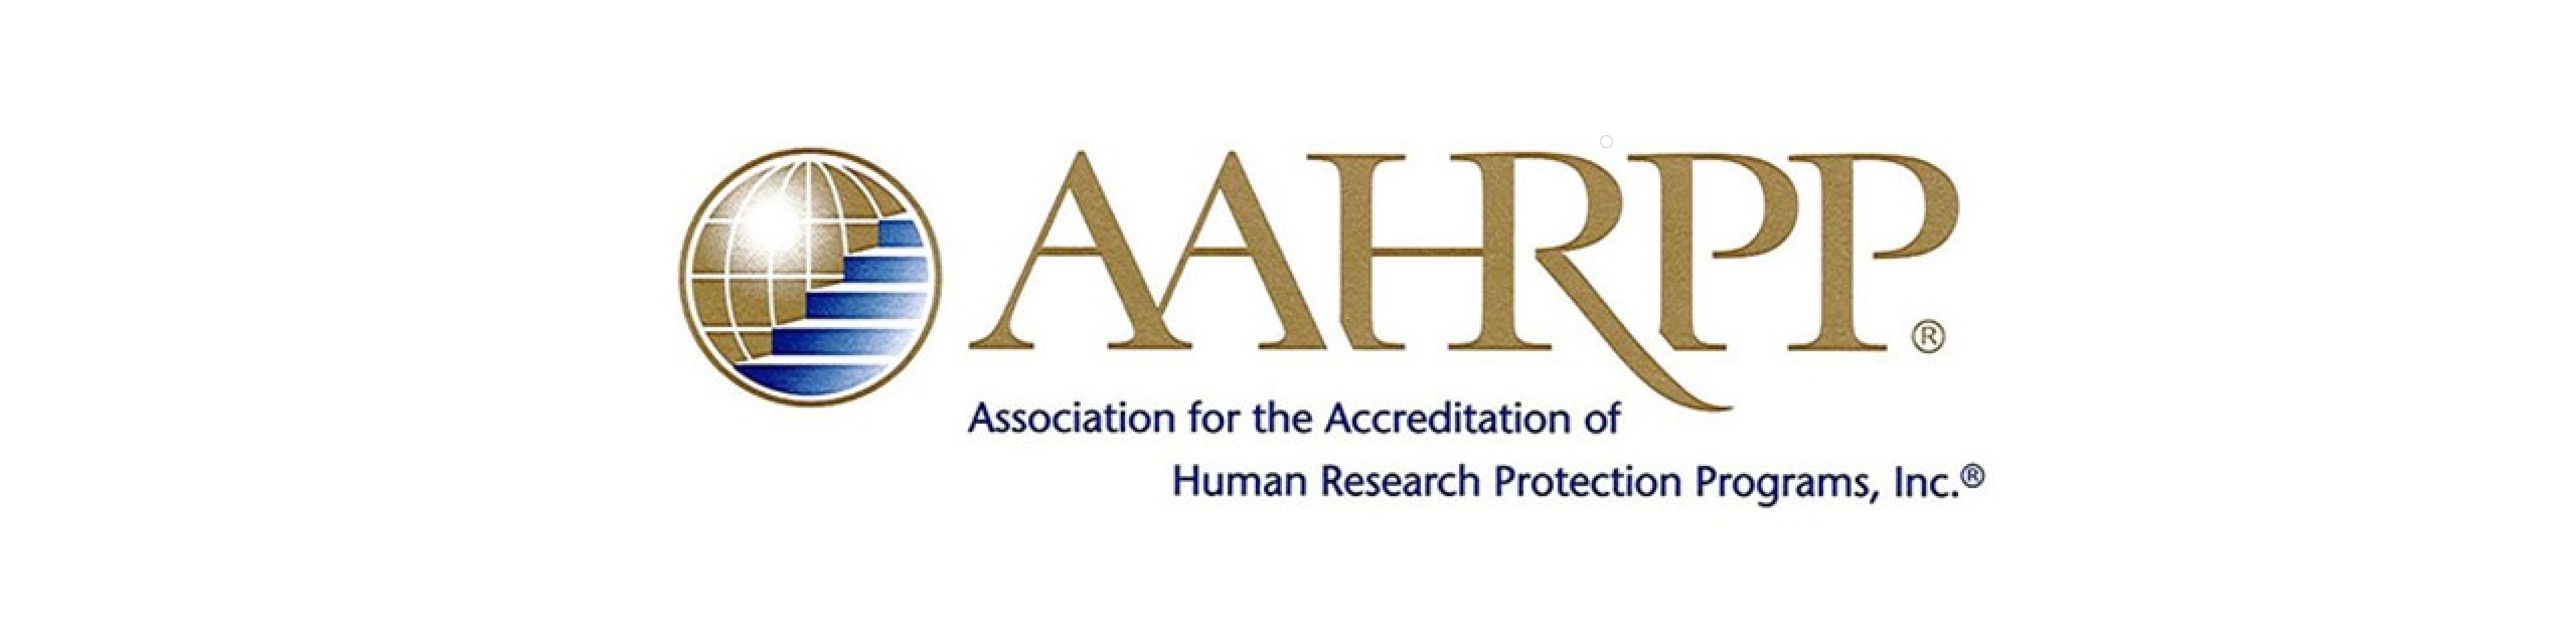 SMU has been awarded full re-accreditation for five years by AAHRPP.